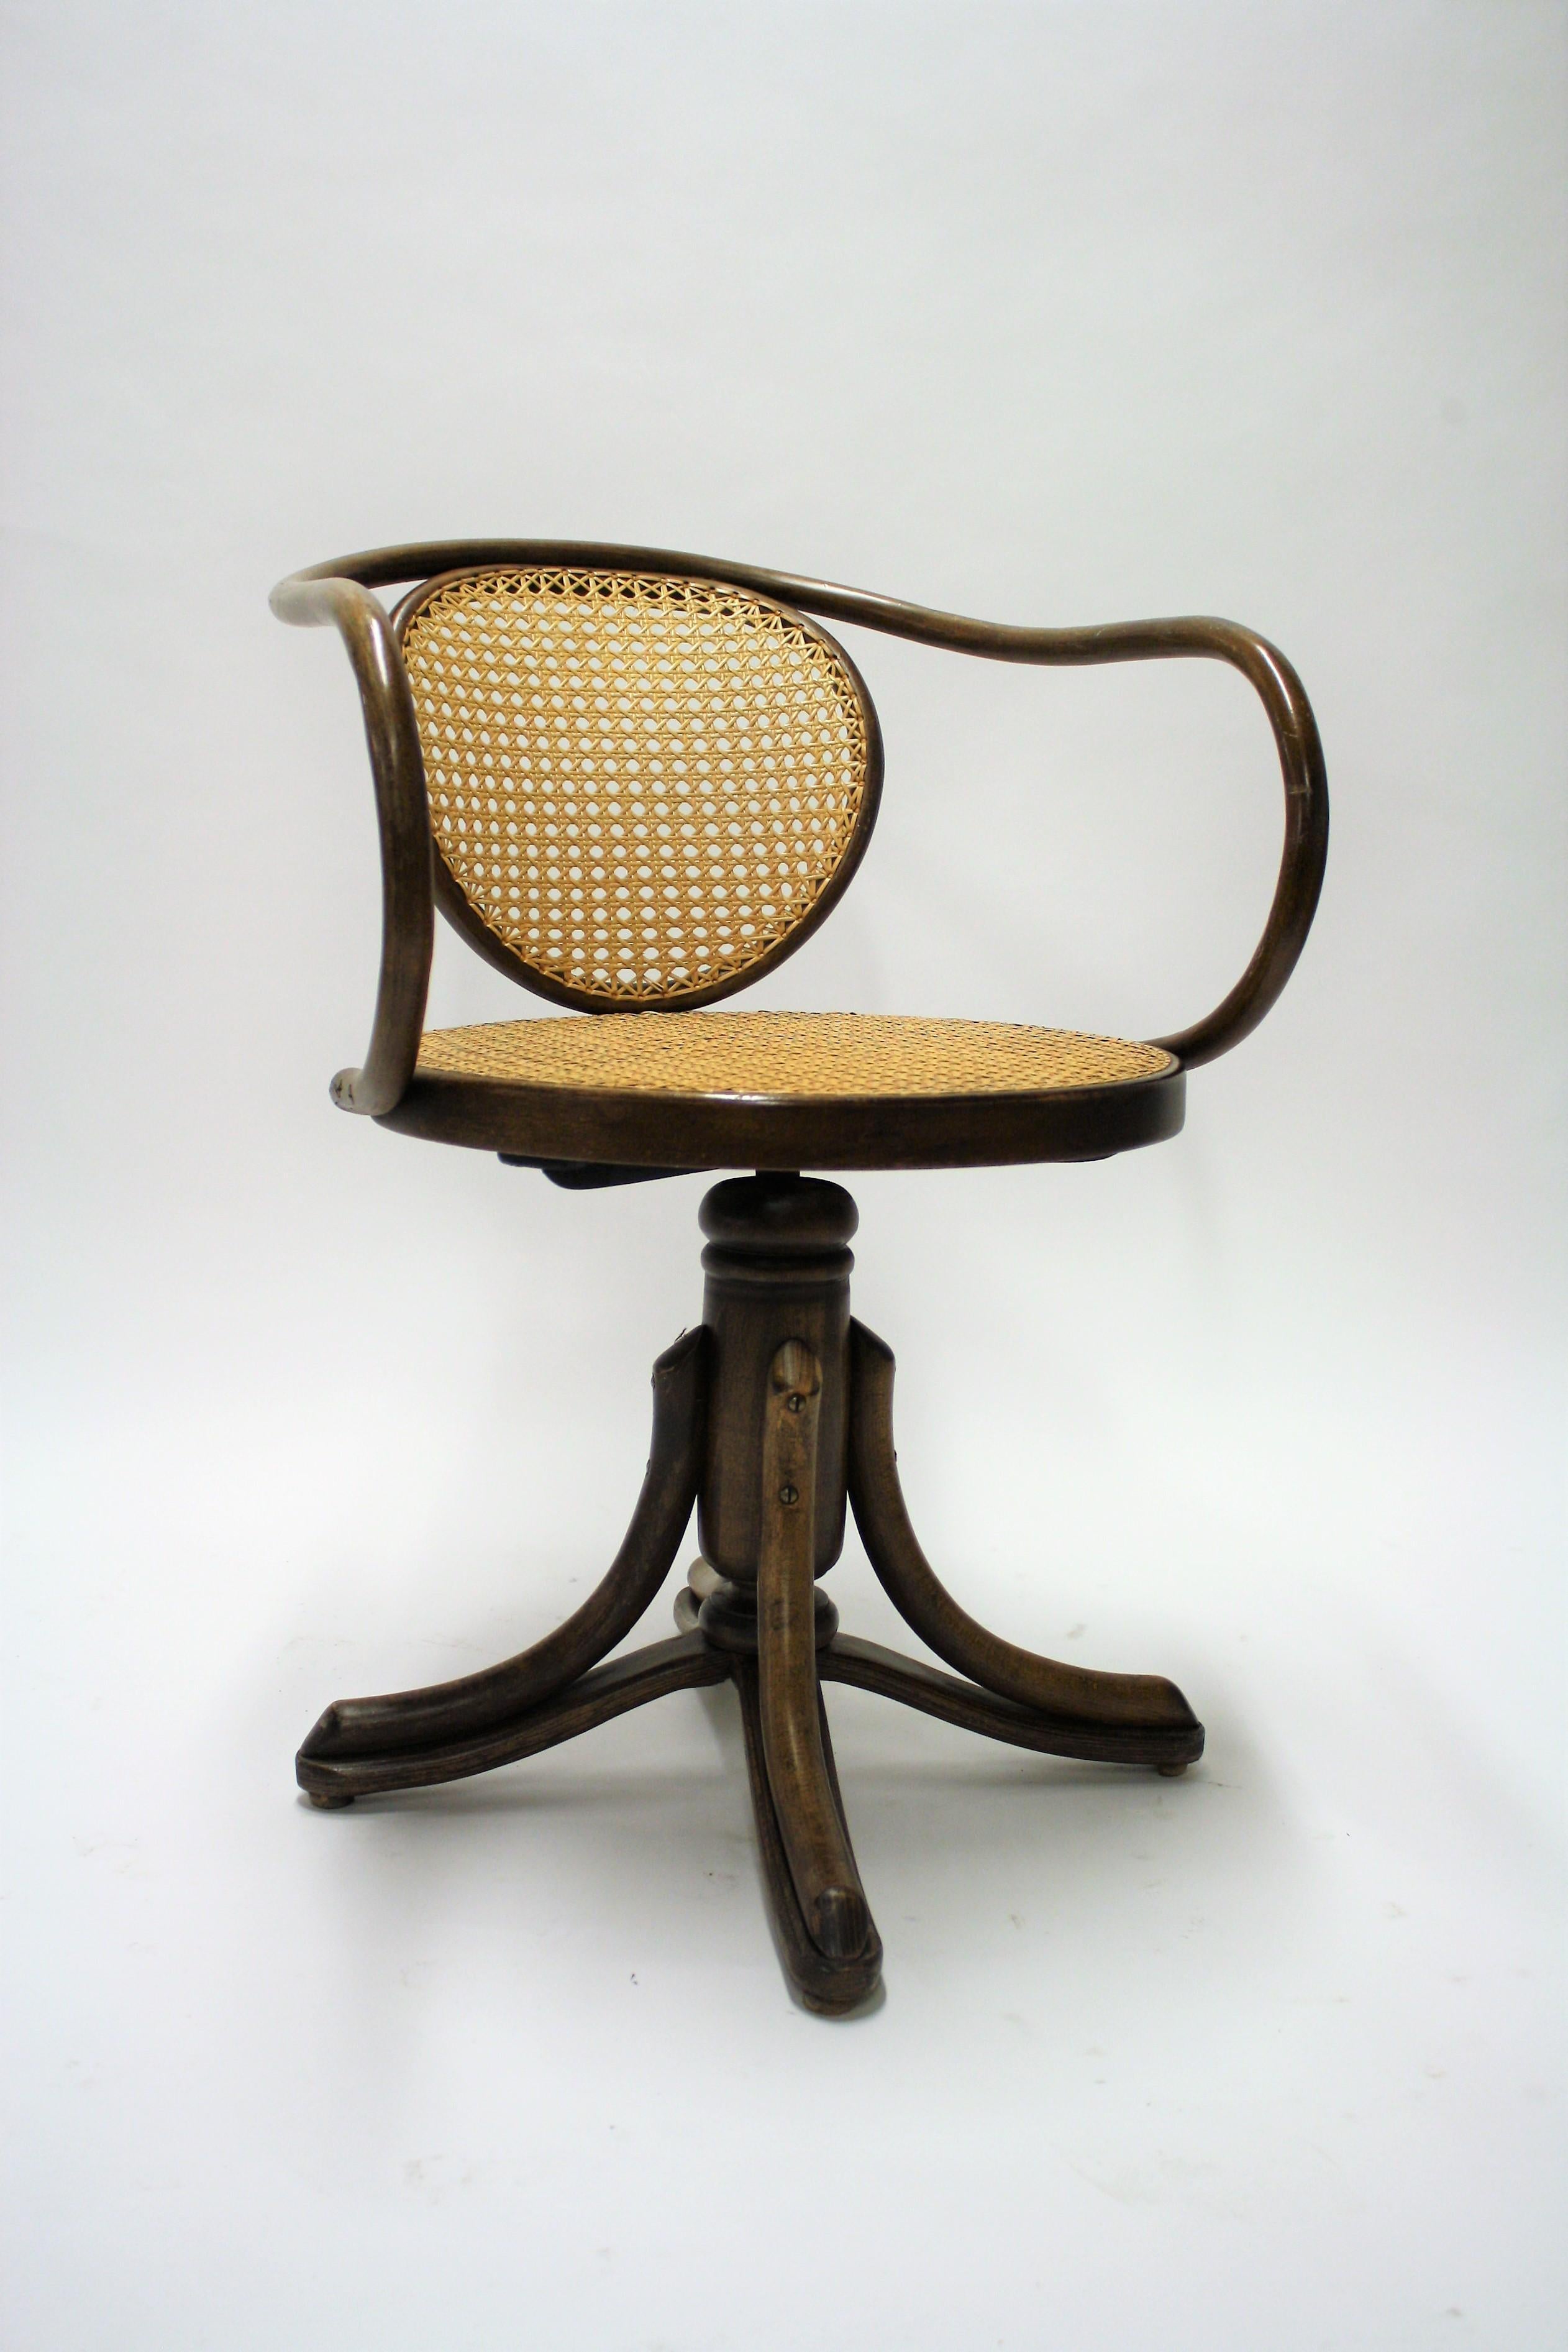 Late 19th-early 20th century bentwood and rattan desk chair designed by Thinef for ZPR Daomsko.

Model 5501.

This swivel chair is adjustable in height by turning it.

Thonet was one of the first company using the steam bending technique for